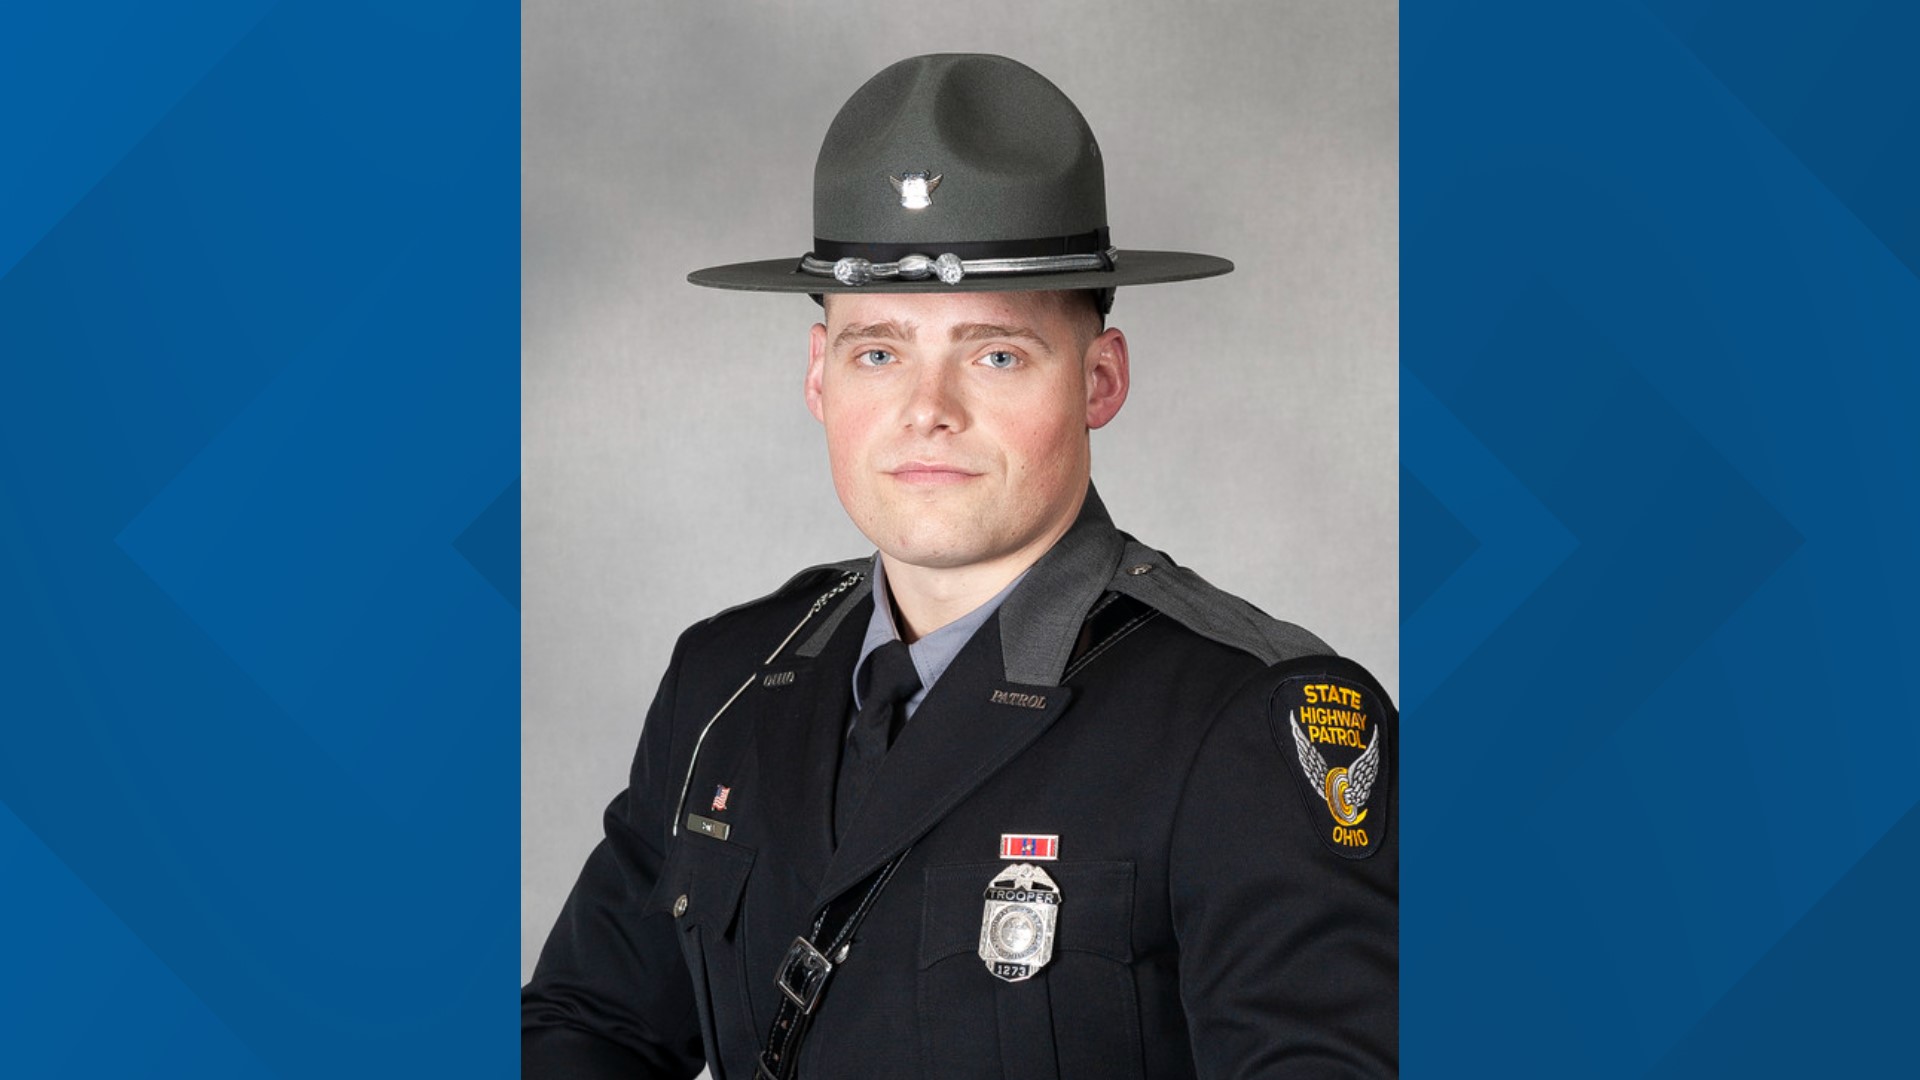 Trooper Austin D. Crow was hit just after 11:20 p.m. on Interstate 70 in Licking County while standing outside of his vehicle.